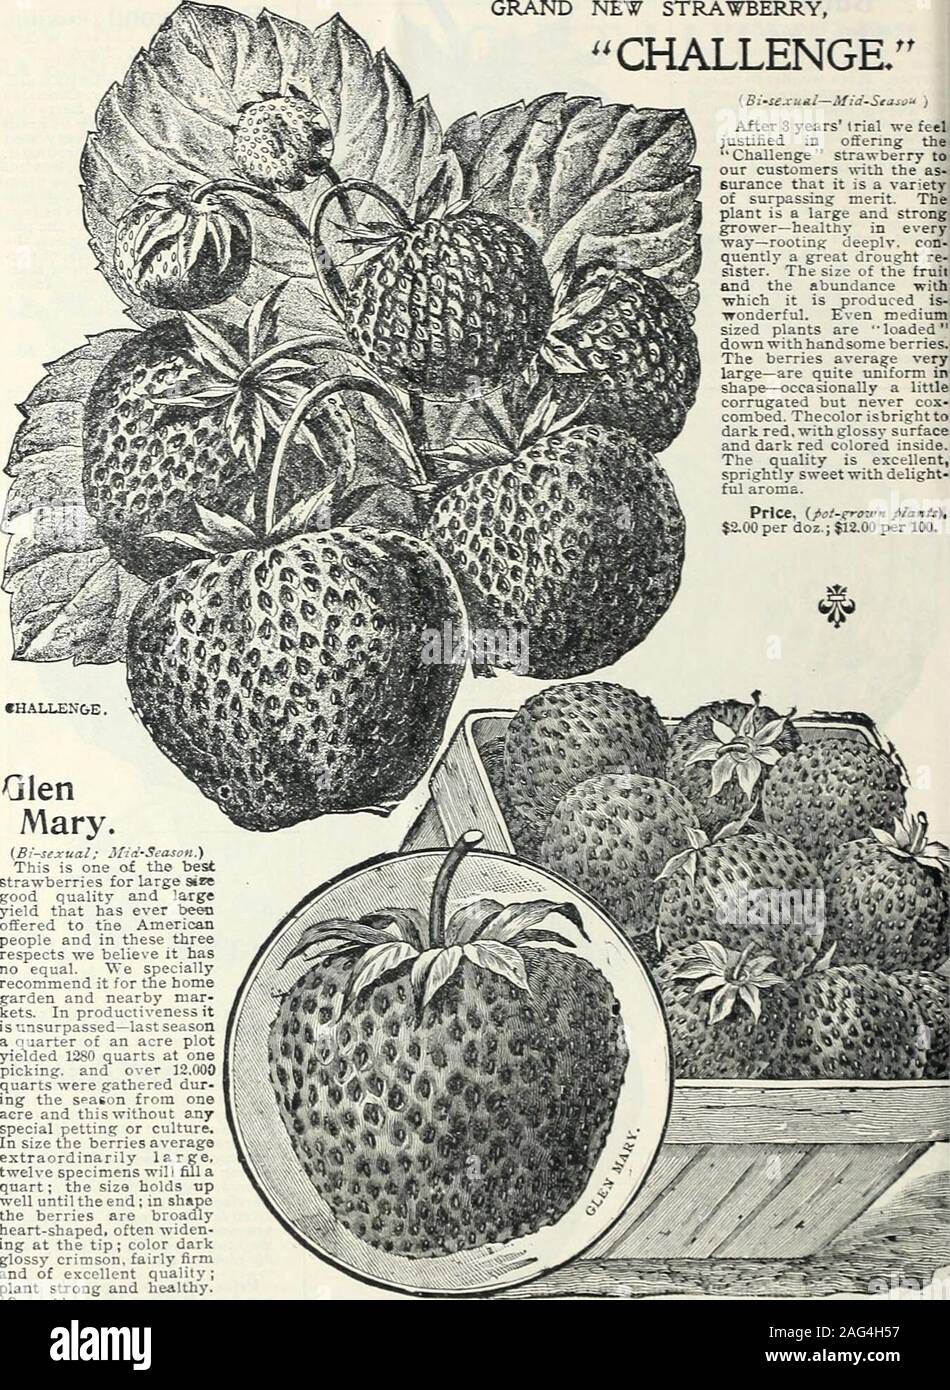 . Mid-summer catalogue 1902 : plants for summer planting, seeds for summer sowing, lawn and garden requisites, insect and fungus destroyers. Mc.per doz.; $3.00 per 1(K). &lt;too4r«d by mvll, a&lt;td for pofftayw lOc t9 fl|a *Vfn ptic* ssd Mc to the hundred price. * 6 PETBH HENTDERSON i CO., NEW YORK.—POT-GRQ-U-X STRA-^^ERRY PLANTS. GRAND NEW STRA^TBERRY, CHALLENGE. (Bi-iejcual—Mid-Season i After 3 years trial we feeljustified in offering theChallenge strawberry toour customers rith the as-surance that it is a varietyof surpassing merit. Theplant is a large and strong 1grower—healthy in every Stock Photo